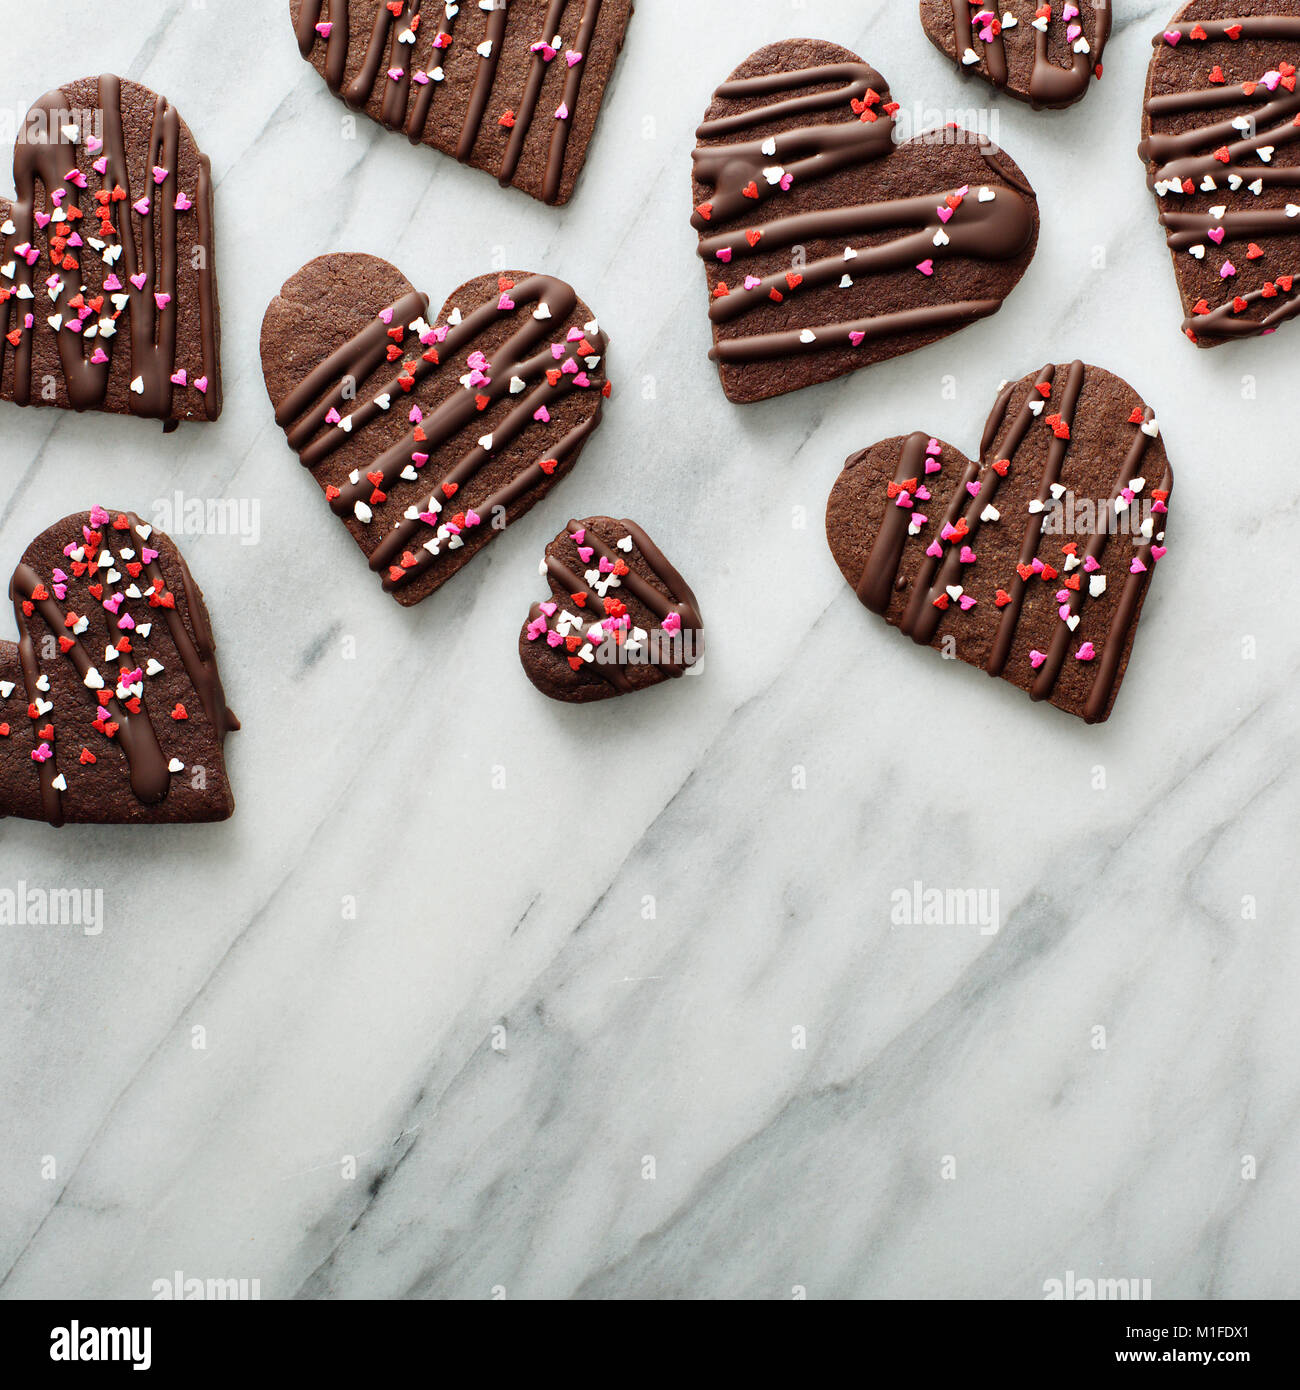 Chocolate hearts cookies with sprinkles for Valentines Day on a marble surface with copy space Stock Photo